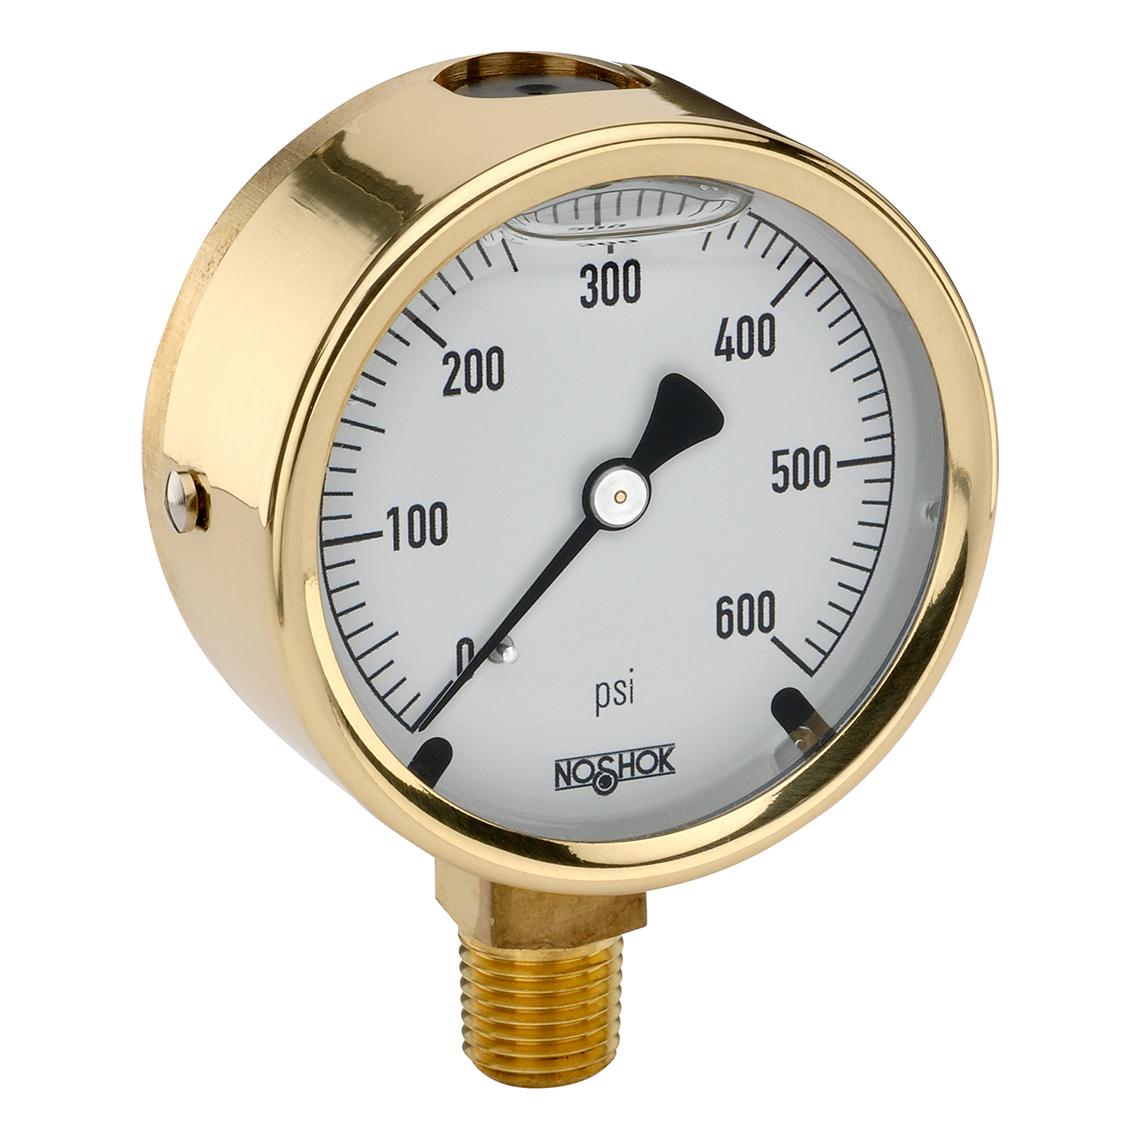 Noshok 25-300-160-PSI 2-1/2'' Brass Case, Copper Alloy Internals, 160 psi, 1/4'' National Pipe Thread (NPT) Male Bottom Connection Pressure Gauge with Glycerin Filled